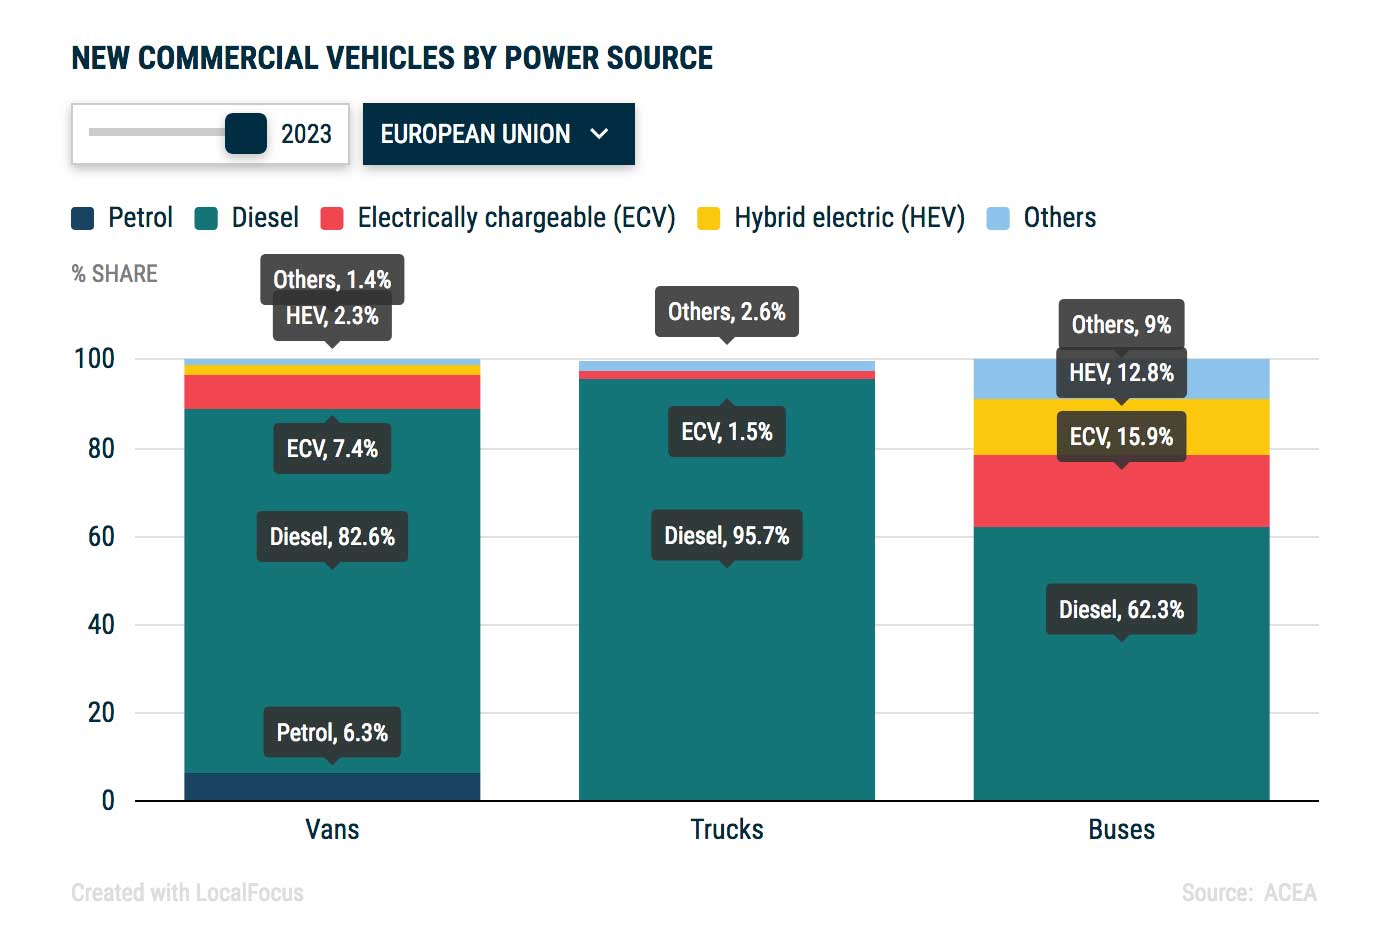 New commercial vehicles by power source